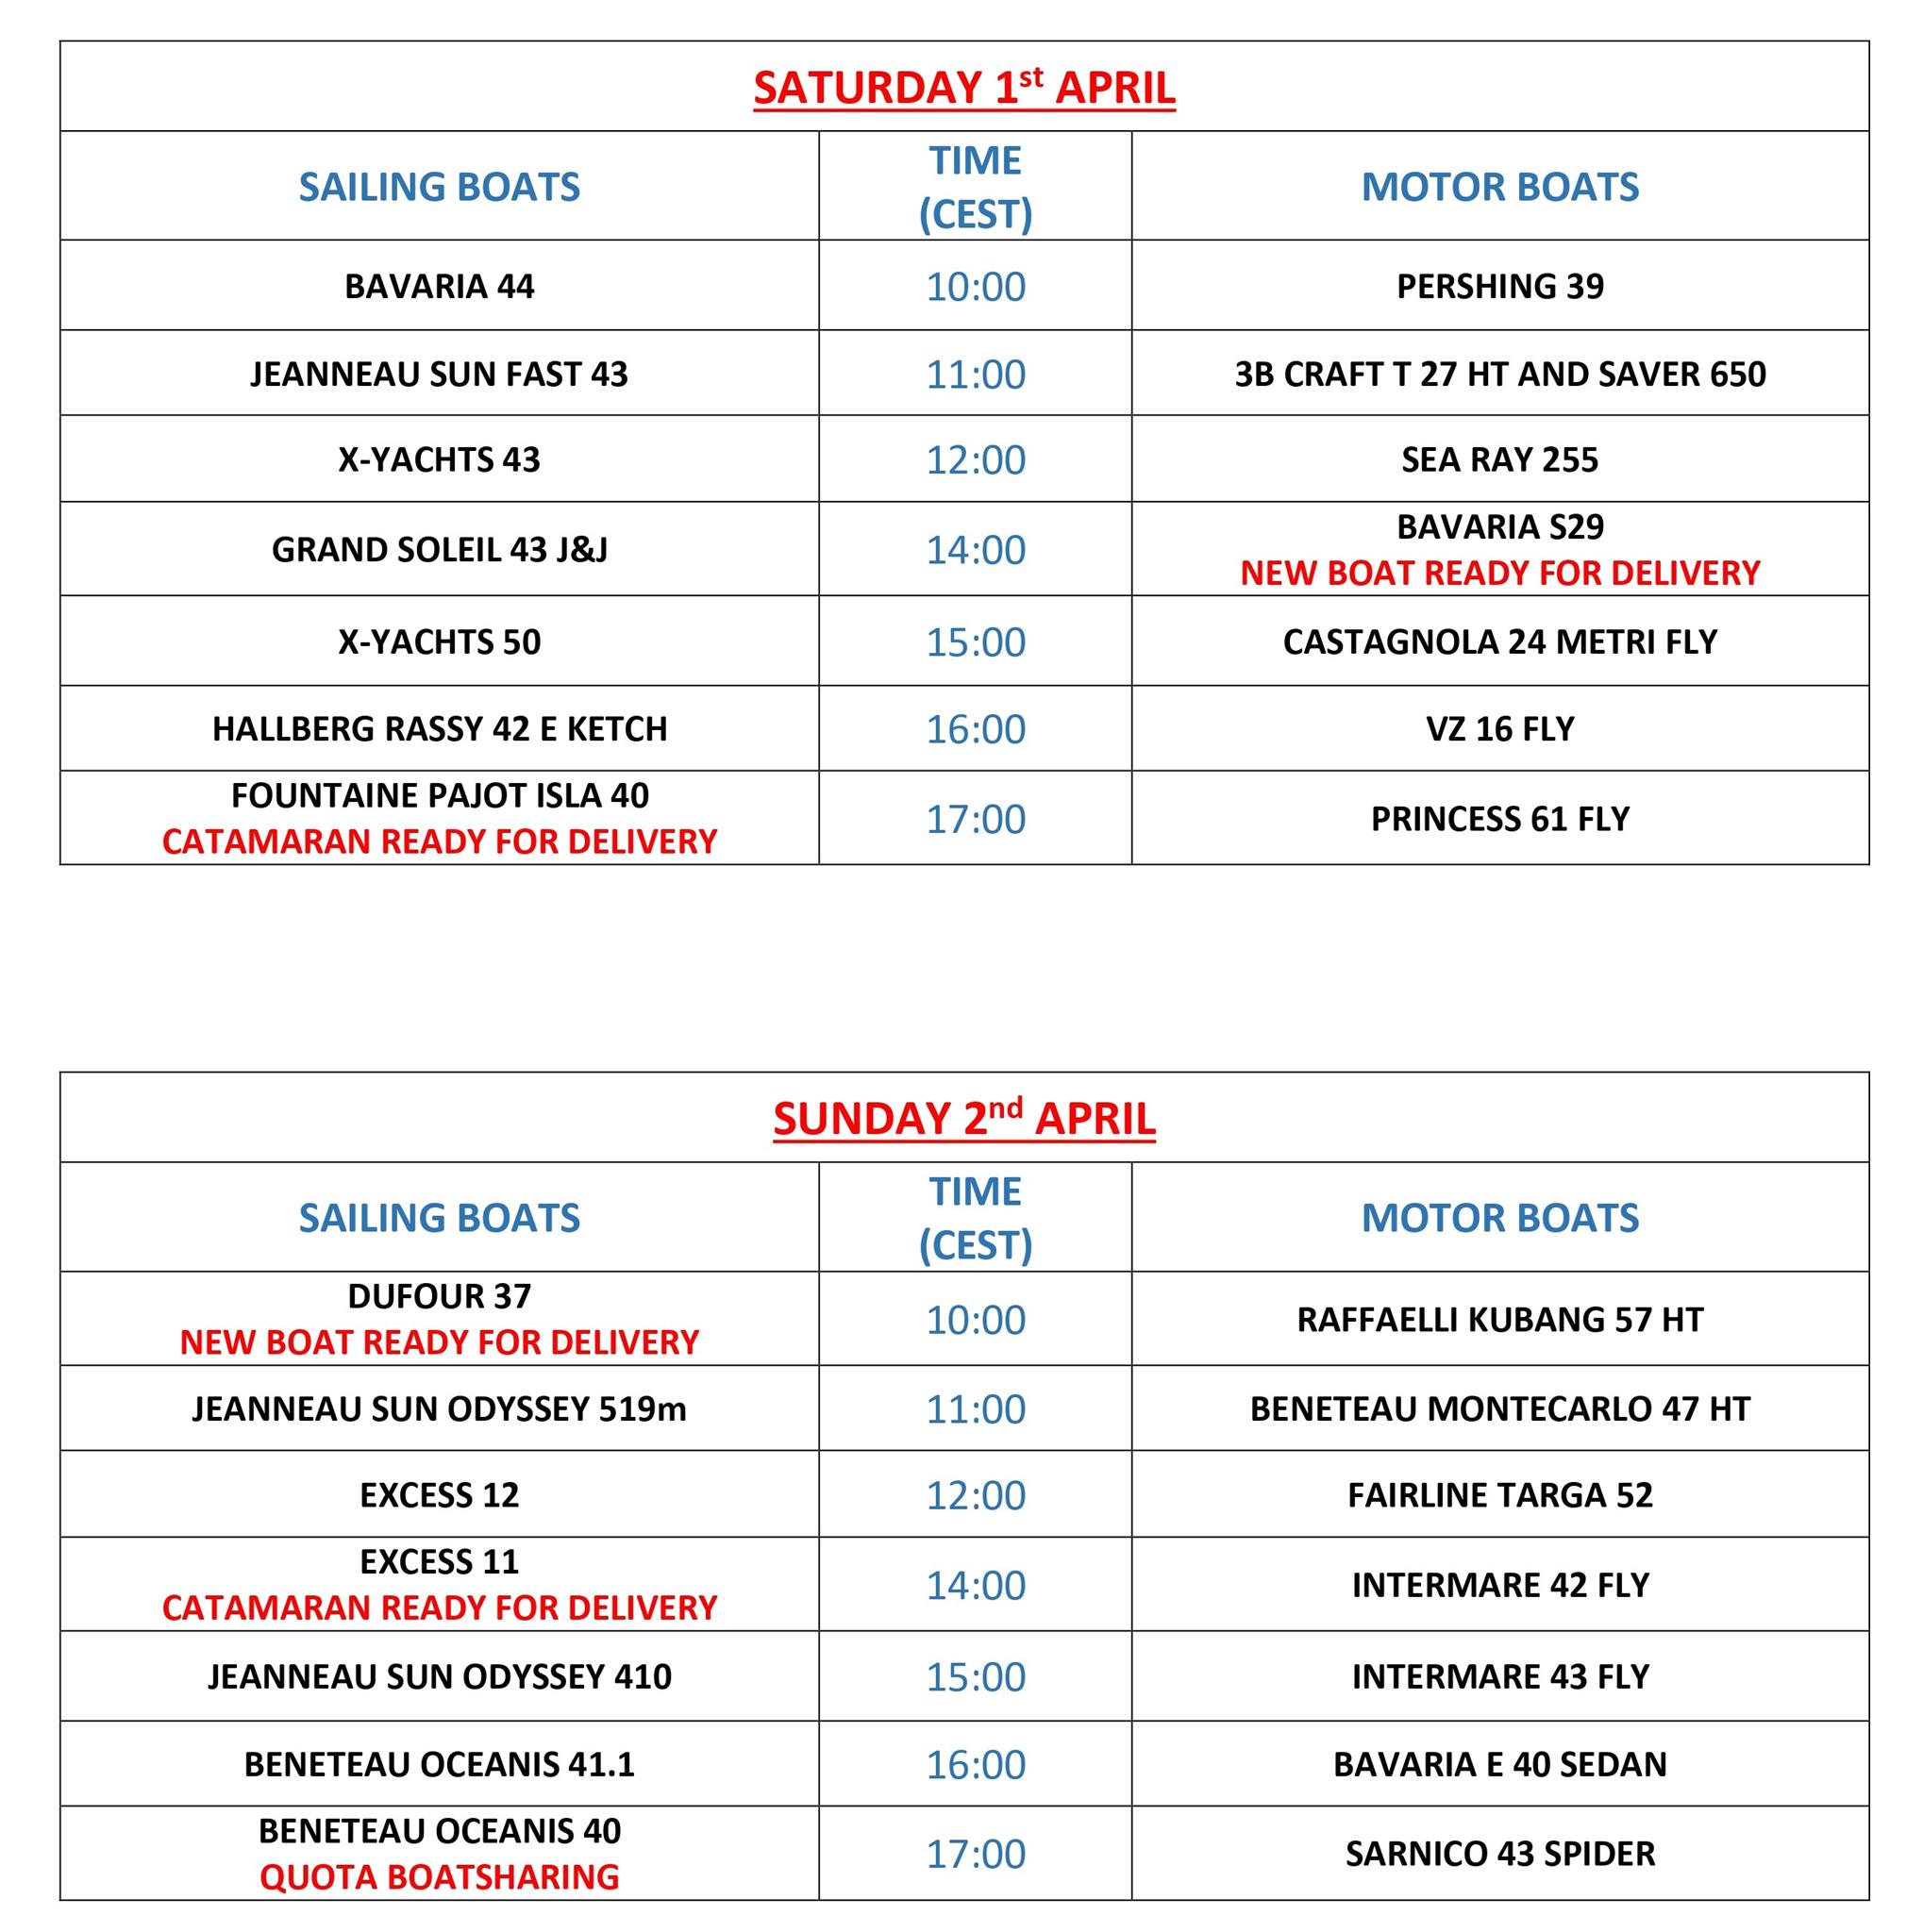 HERE IS THE UPDATED SCHEDULE OF THE 6TH LIVE VIDEO SHOW FOR SECOND-HAND BOATS!